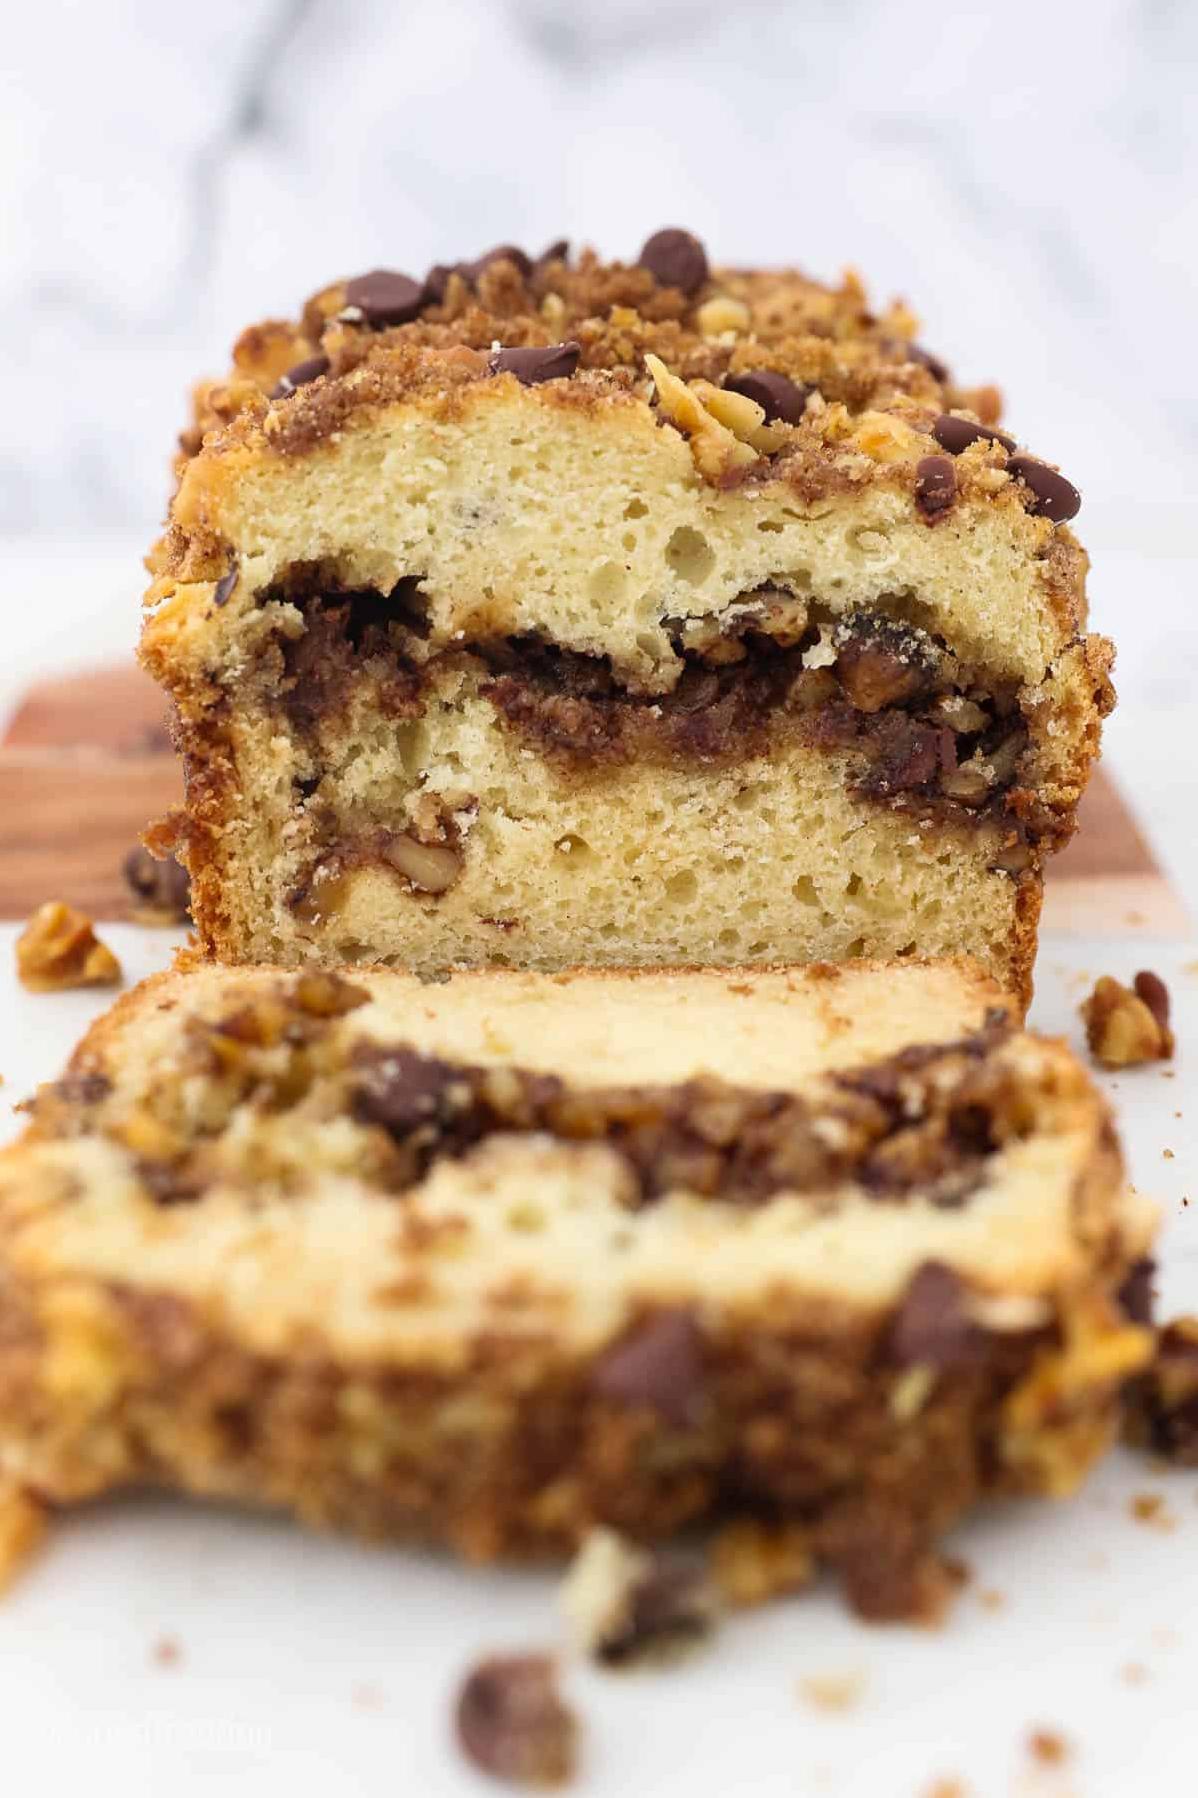  Indulge in a slice of pure comfort with this chocolate chip streusel coffee cake.